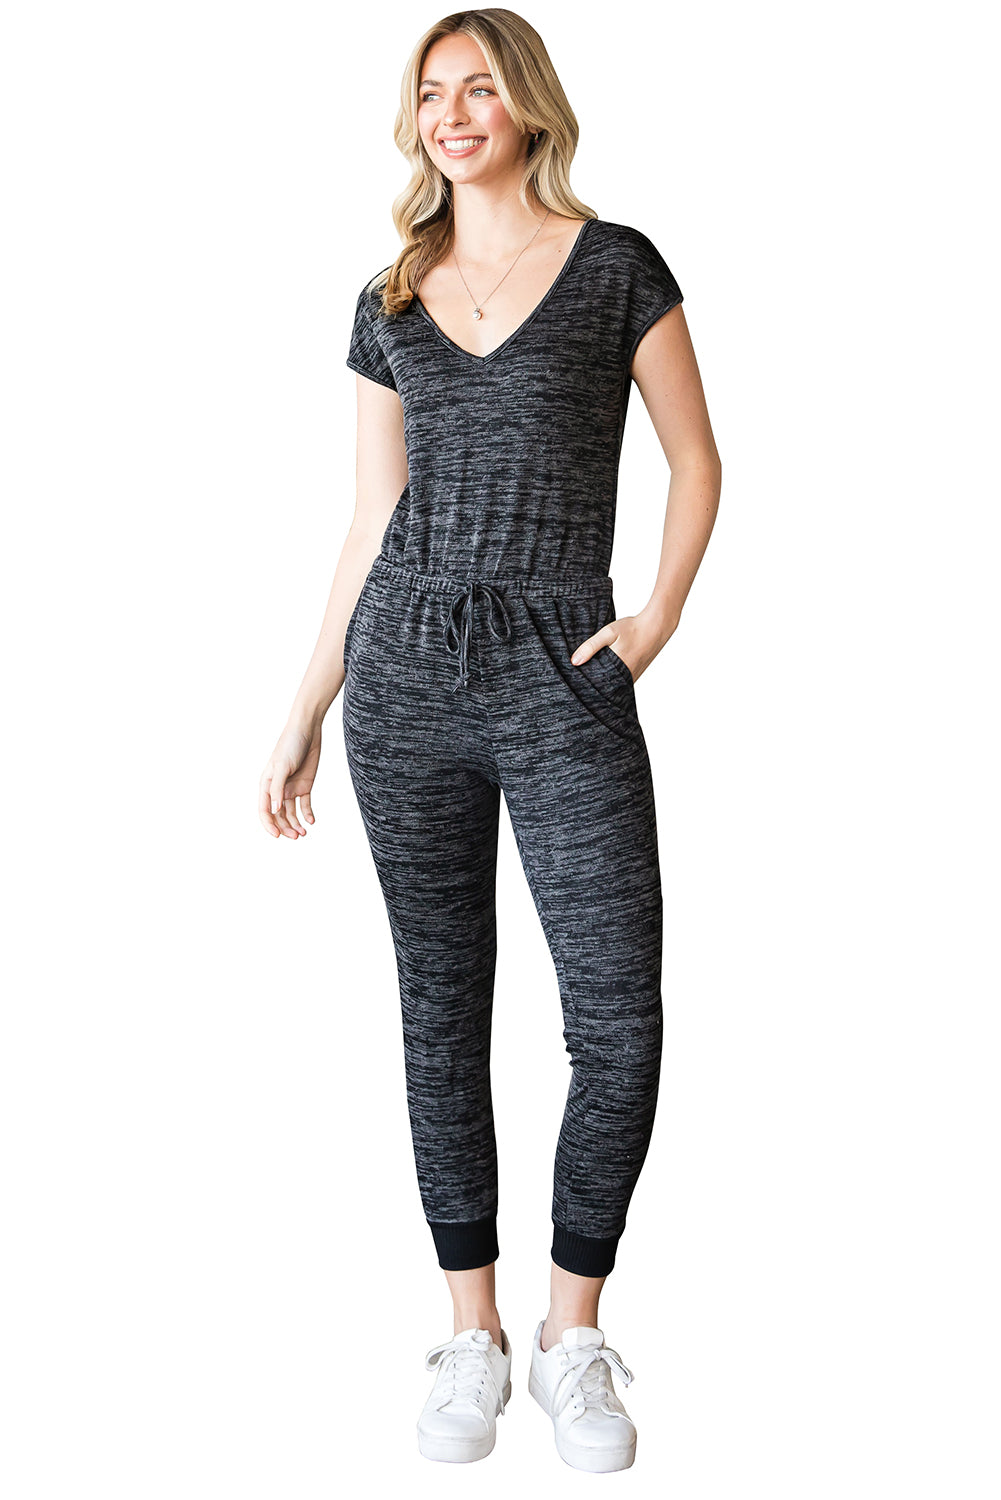 - Pocket Casual Drawstring High Waisted Jumpsuit - Jumpsuits & Rompers at TFC&H Co.